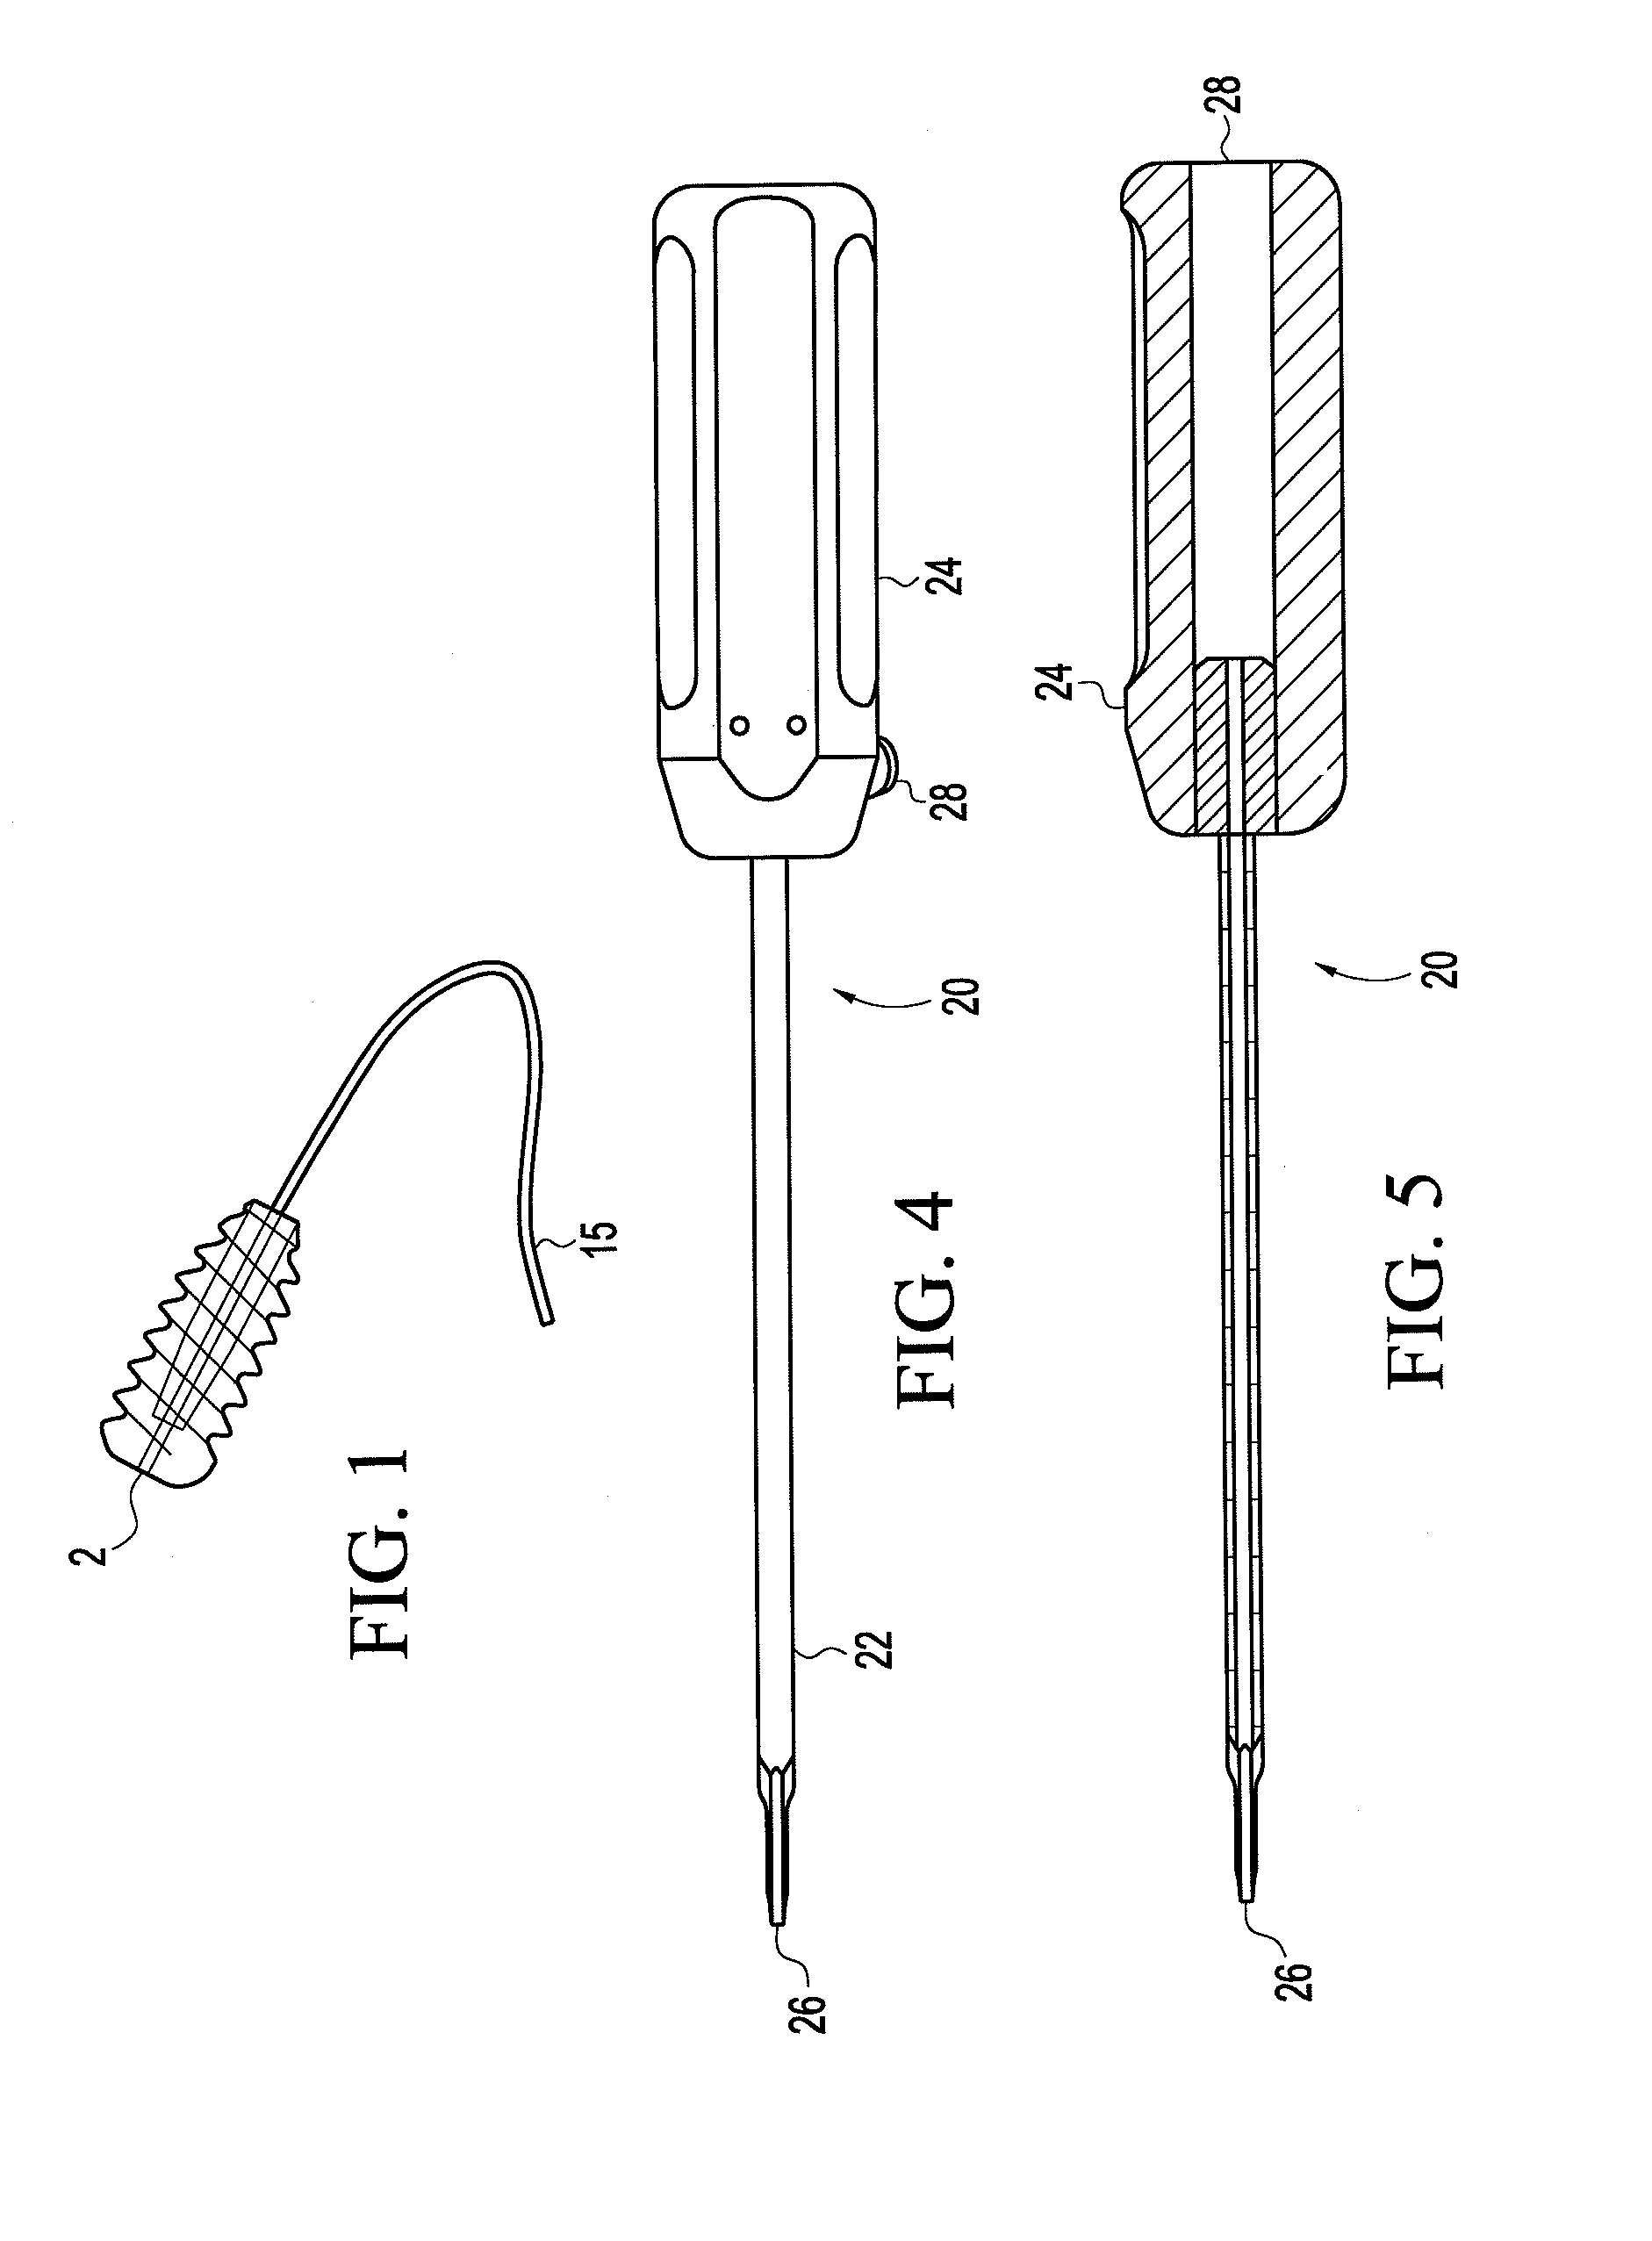 Retrograde fixation technique with insert-molded interference screw